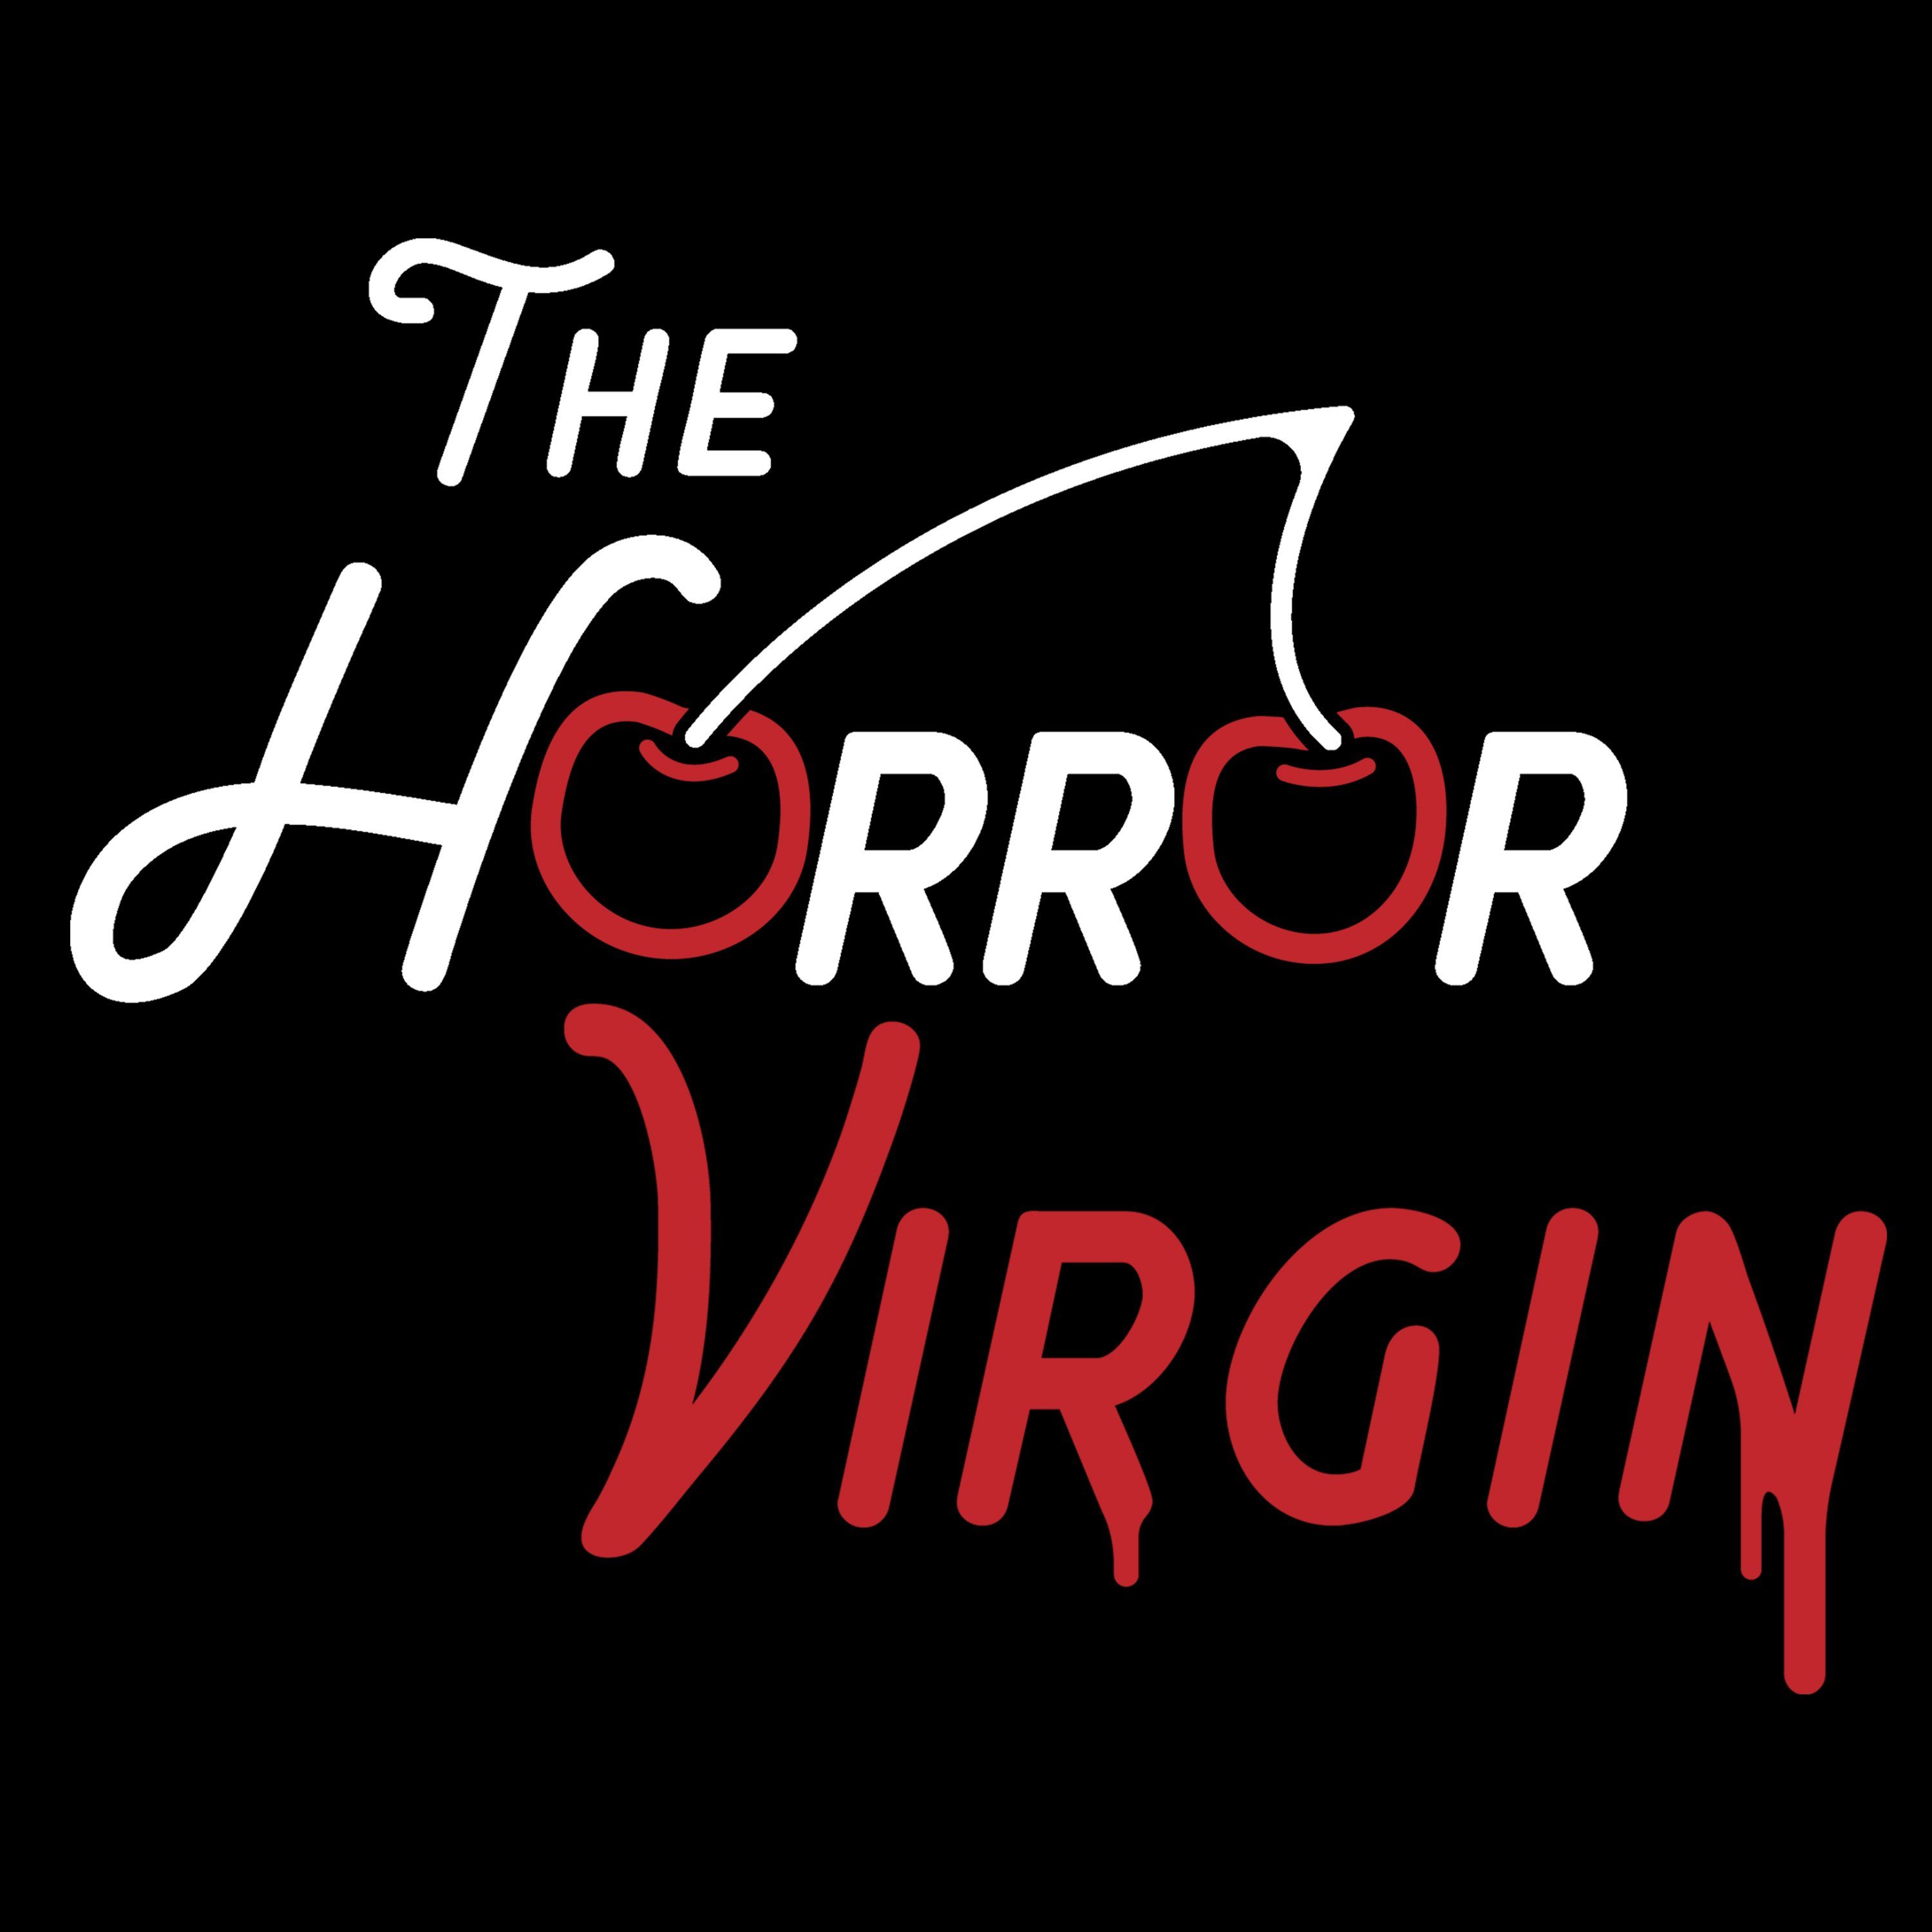 5 Reasons to Listen To The Horror Virgin Podcast